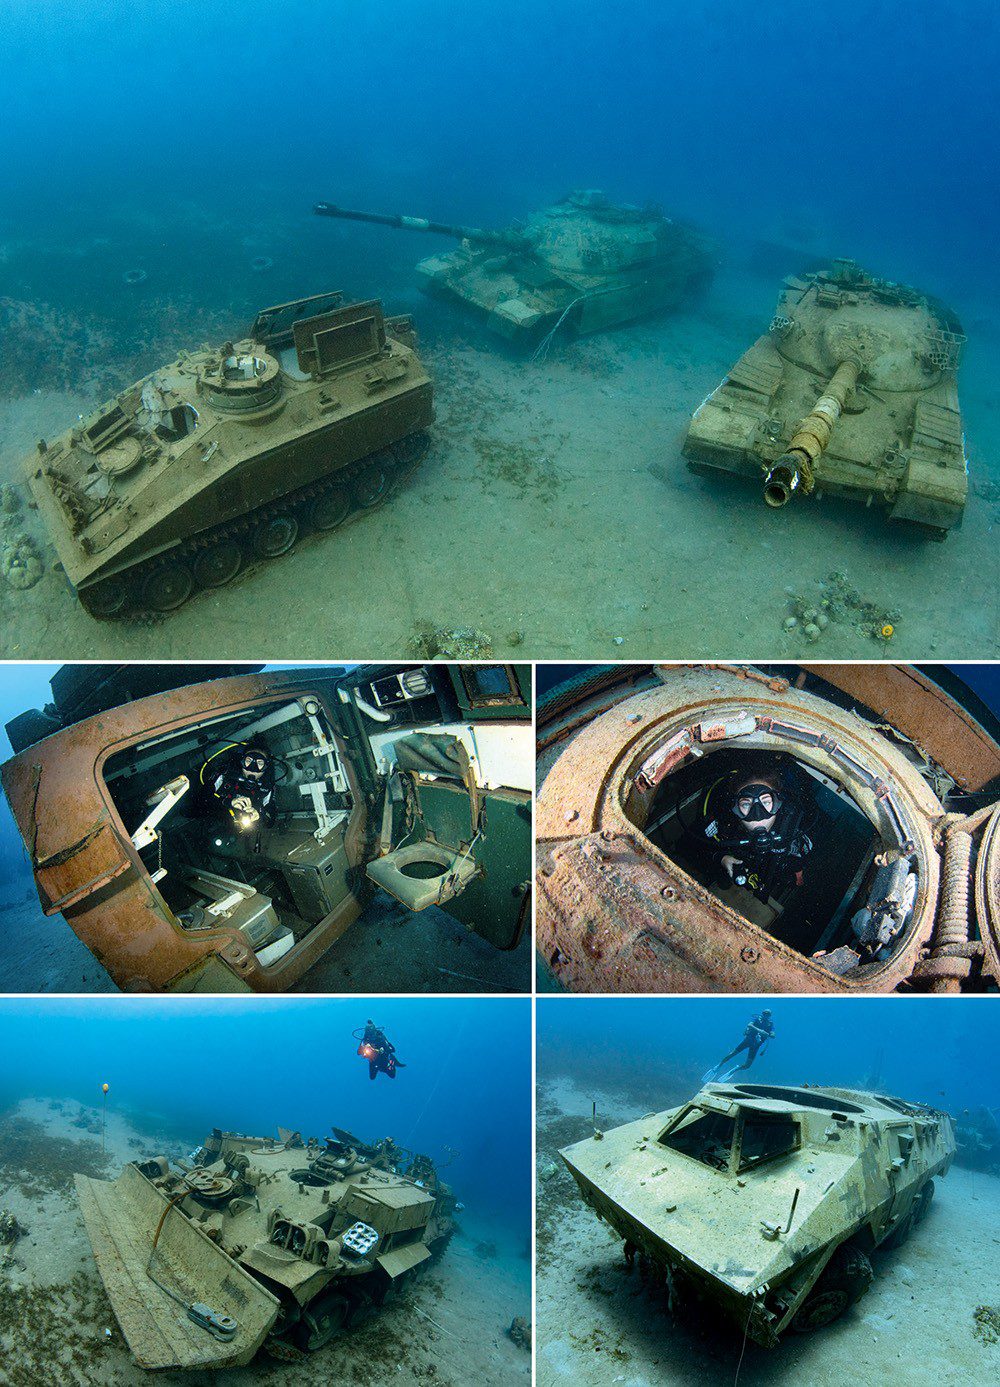 Clockwise from top: Medical FV103 Spartan APC with two Khalid tanks behind; looking out from the Spartan APC; the angular front of the Ratel IFV is very distinctive; a Chieftain ARV converted into a support vehicle; the Spartan still has its folding beds and rear-door toilet in place.